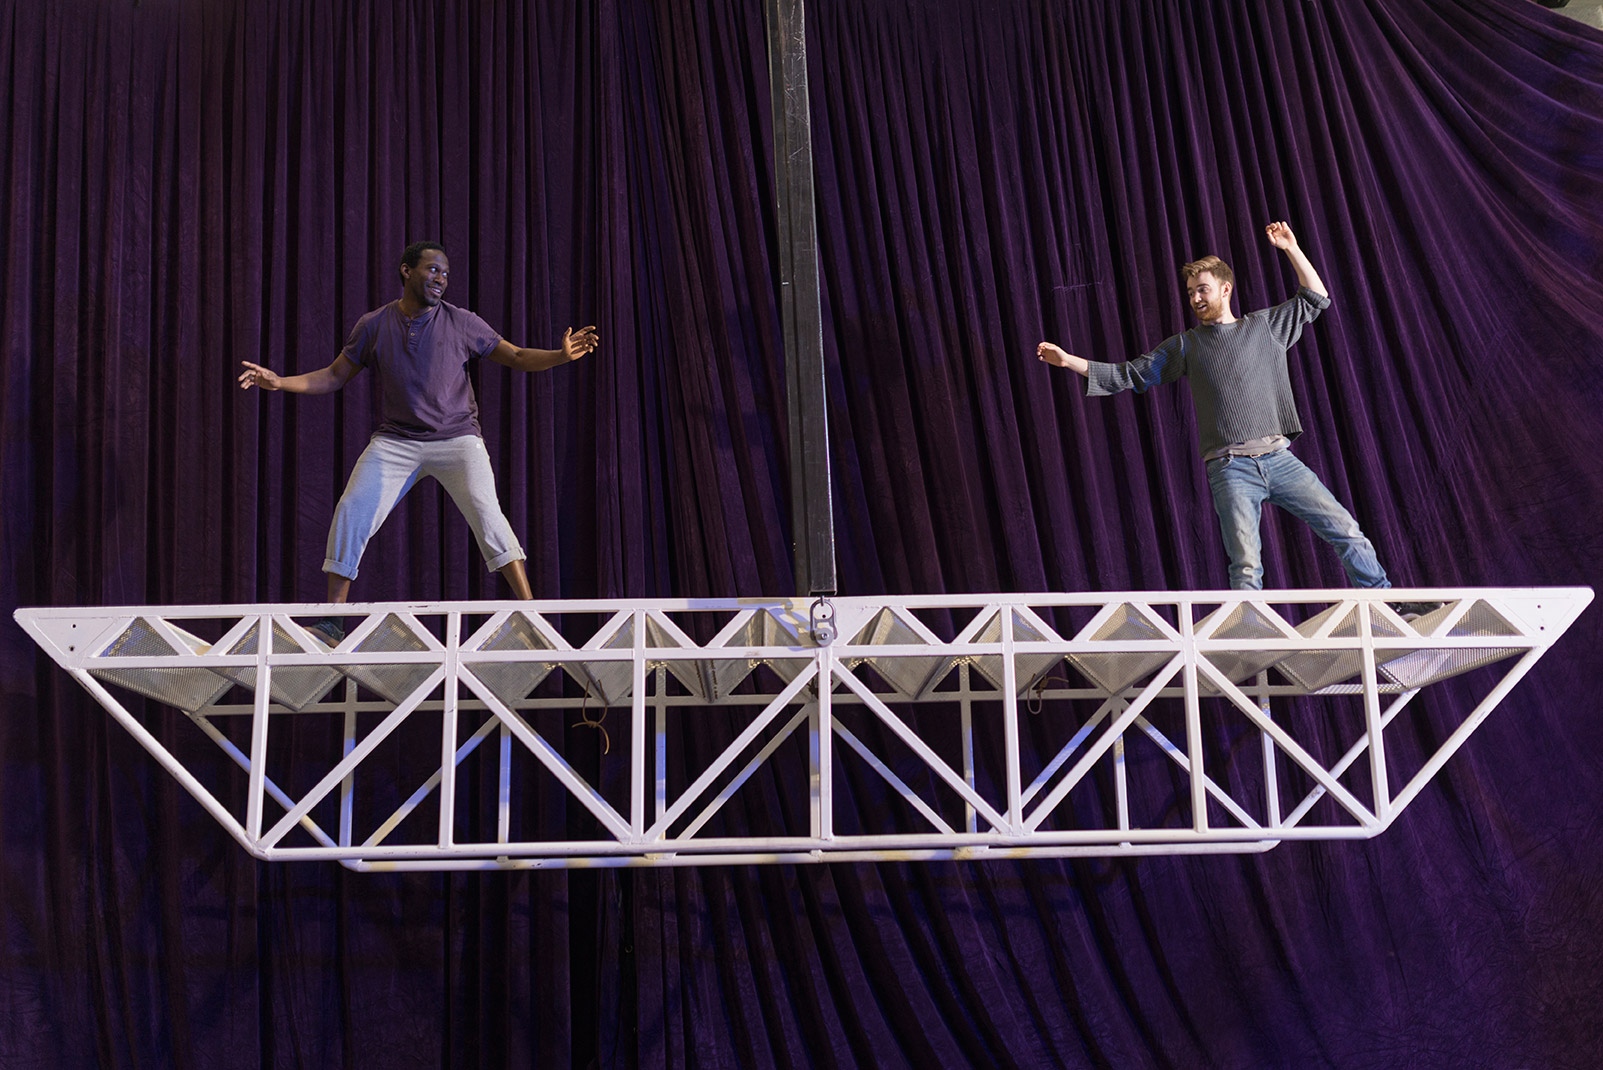 Two men stand on opposite ends of a 6 meters long bridge made of white metal. It is up in the air and acting as a balance, held in its centre by a large metal bar that allows it to balance to the left and to the right.